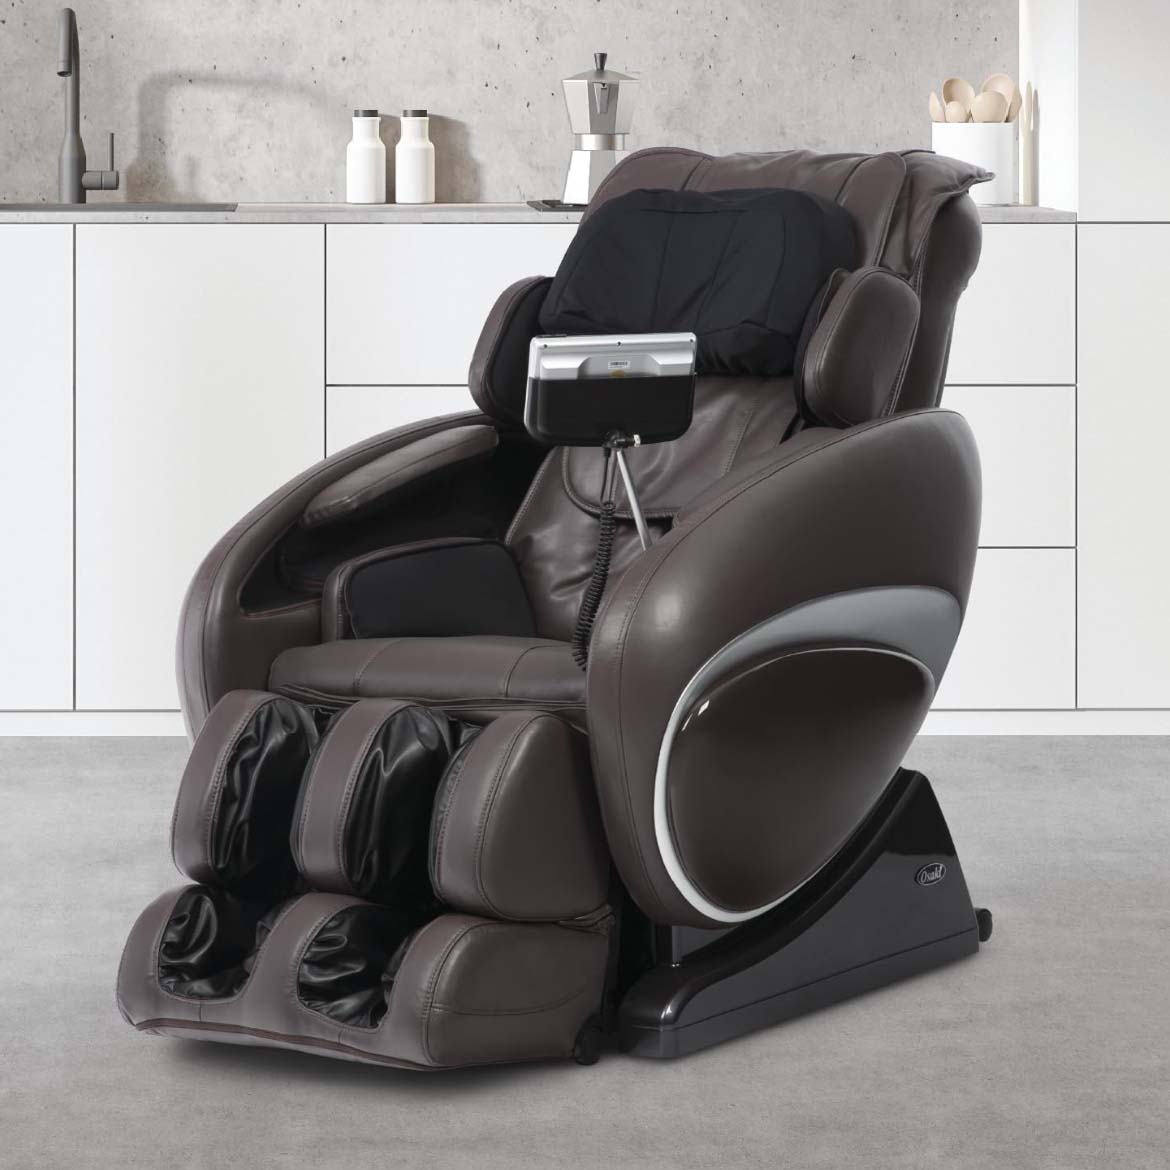 Black massage chair in room setting